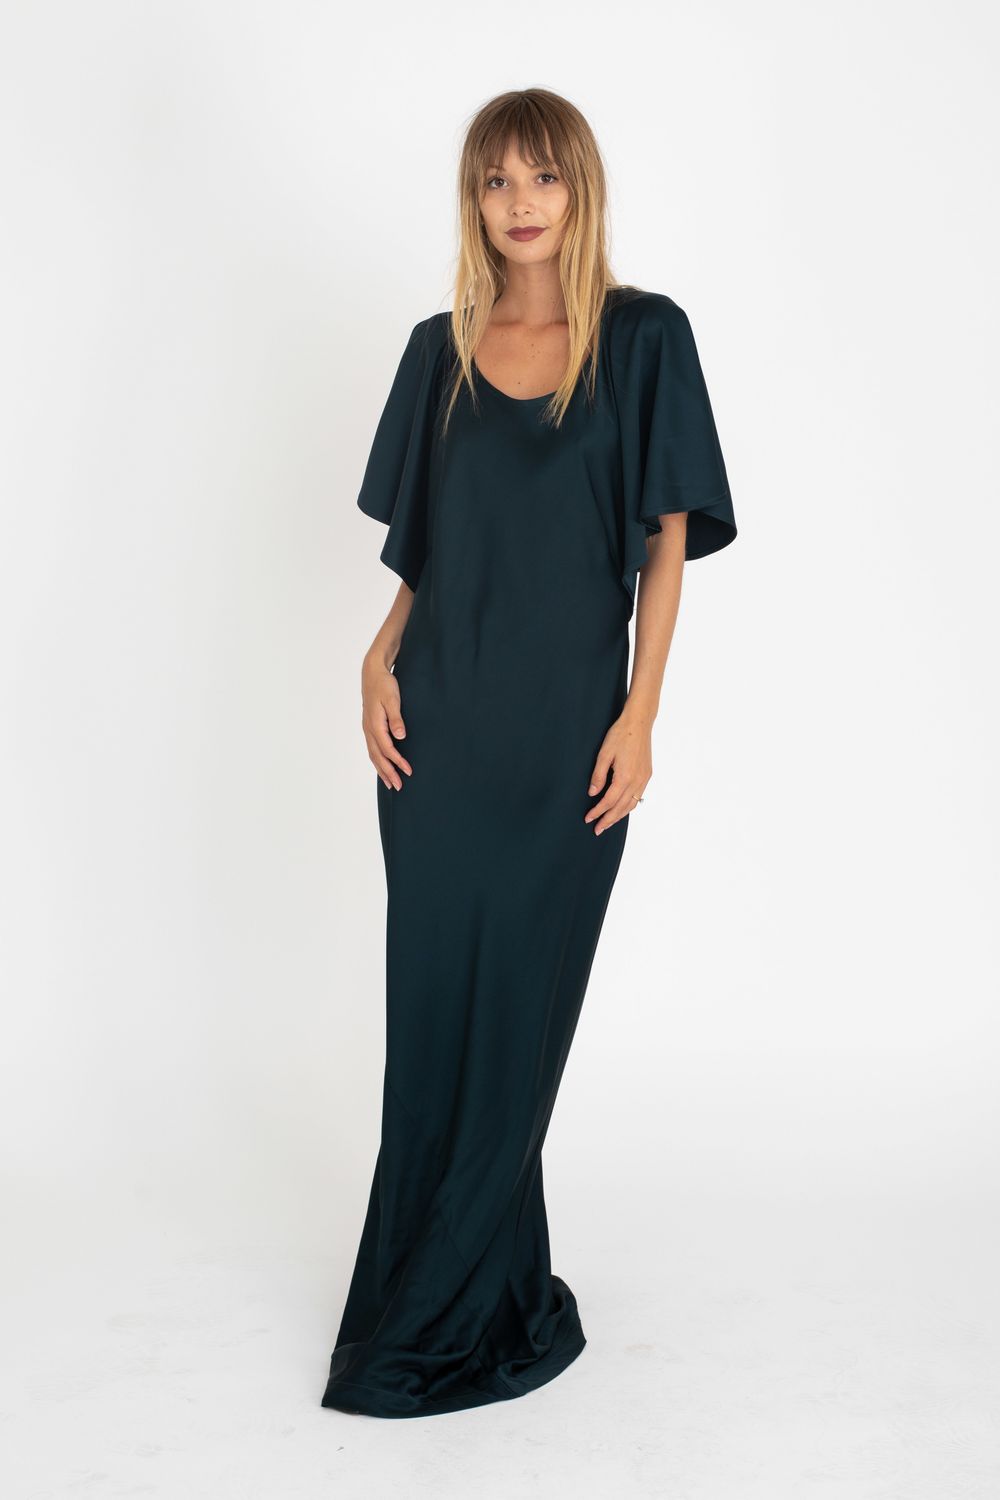 Liam - Fortuna Cape Gown | All The Dresses